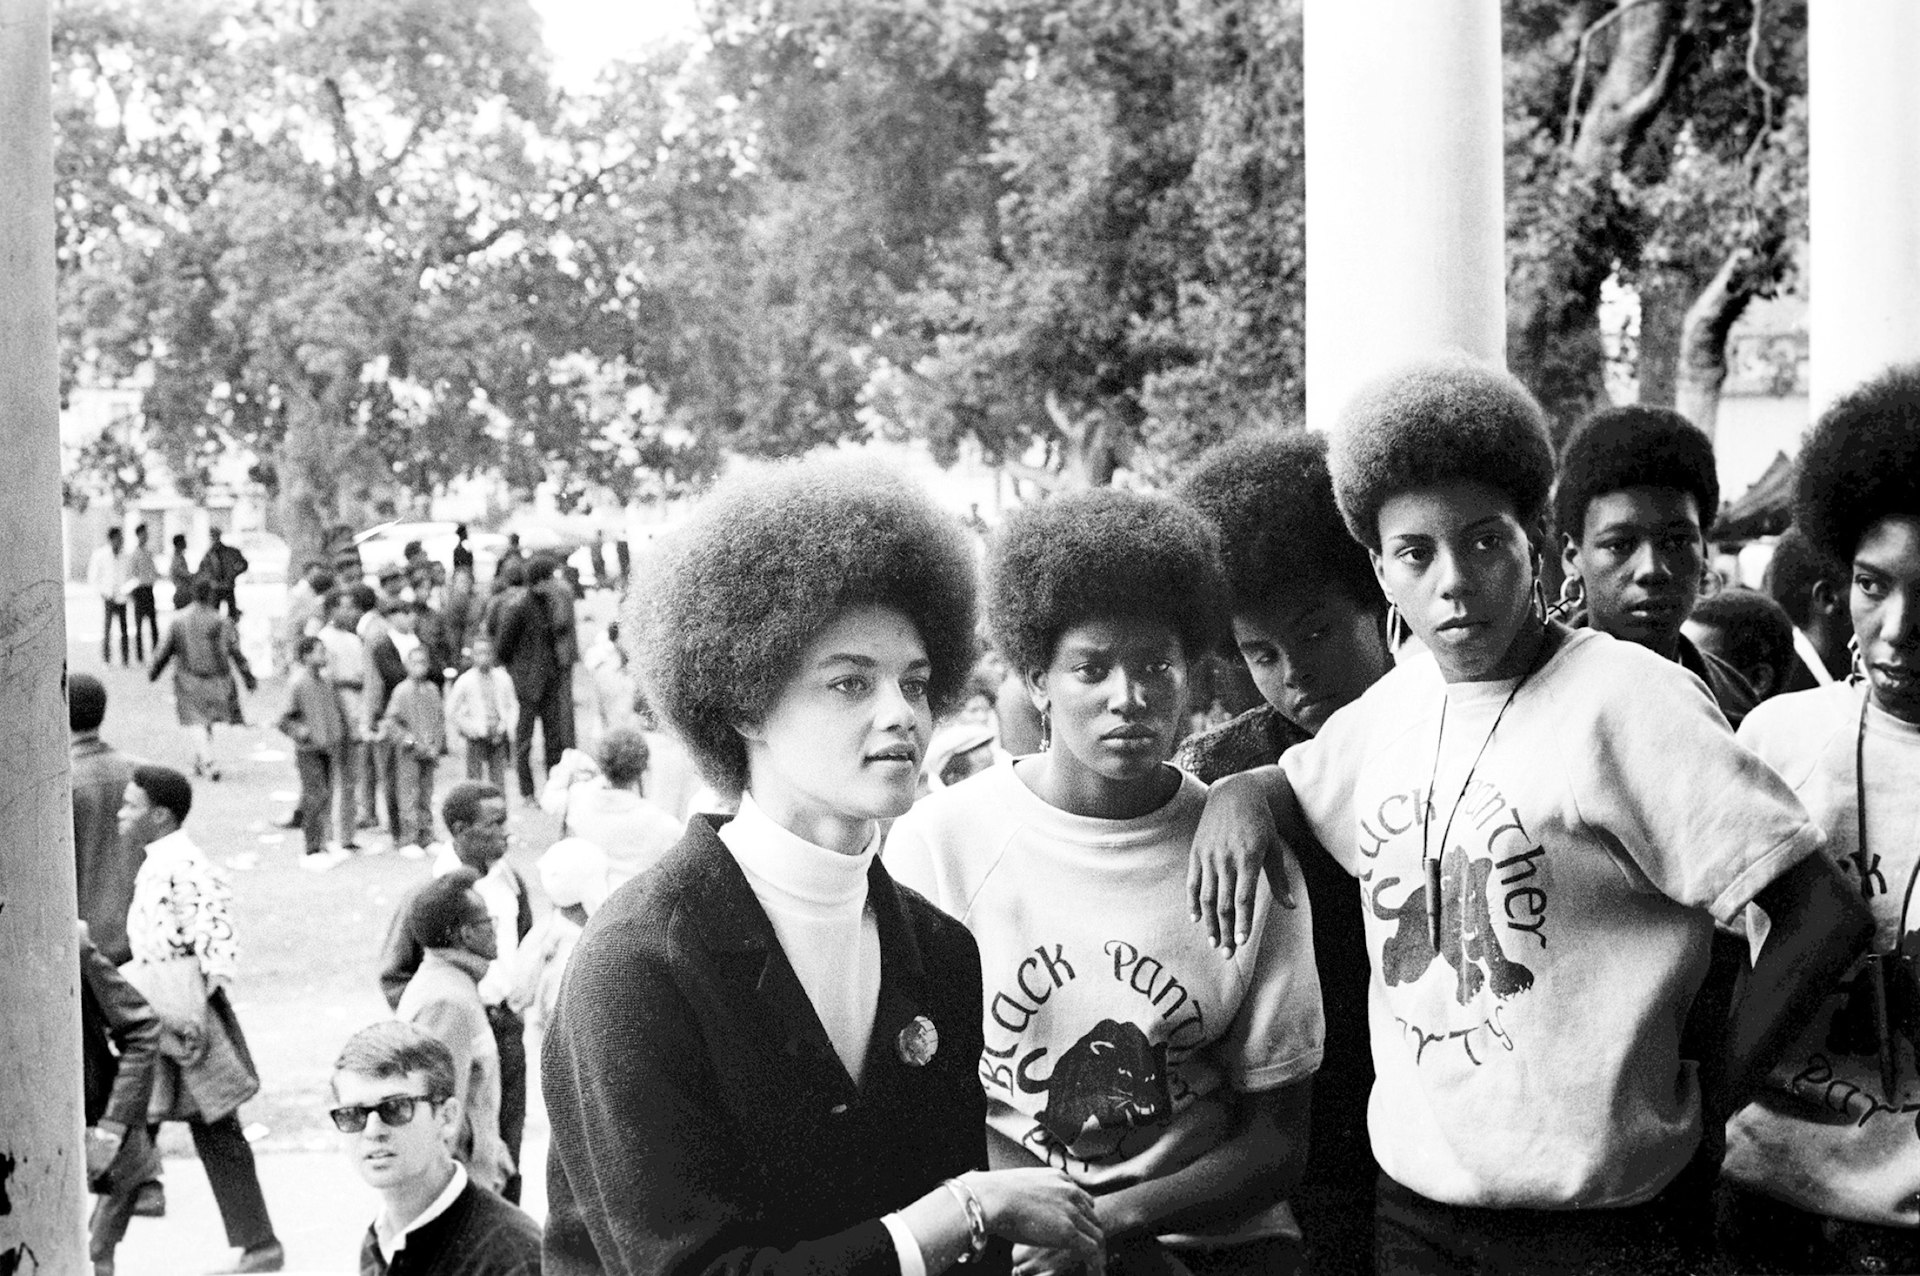 Kathleen Cleaver at a Free Huey rally in DeFremery Park, Oakland, 1968